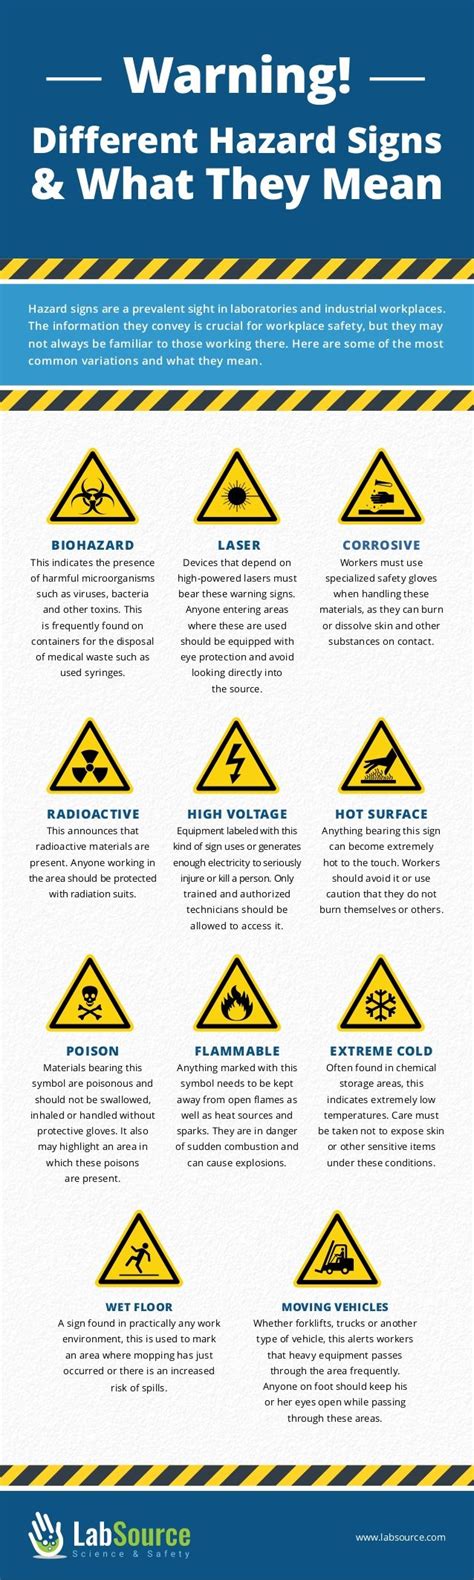 Common Hazard Signs You Might See At Work And What They Mean Hazard